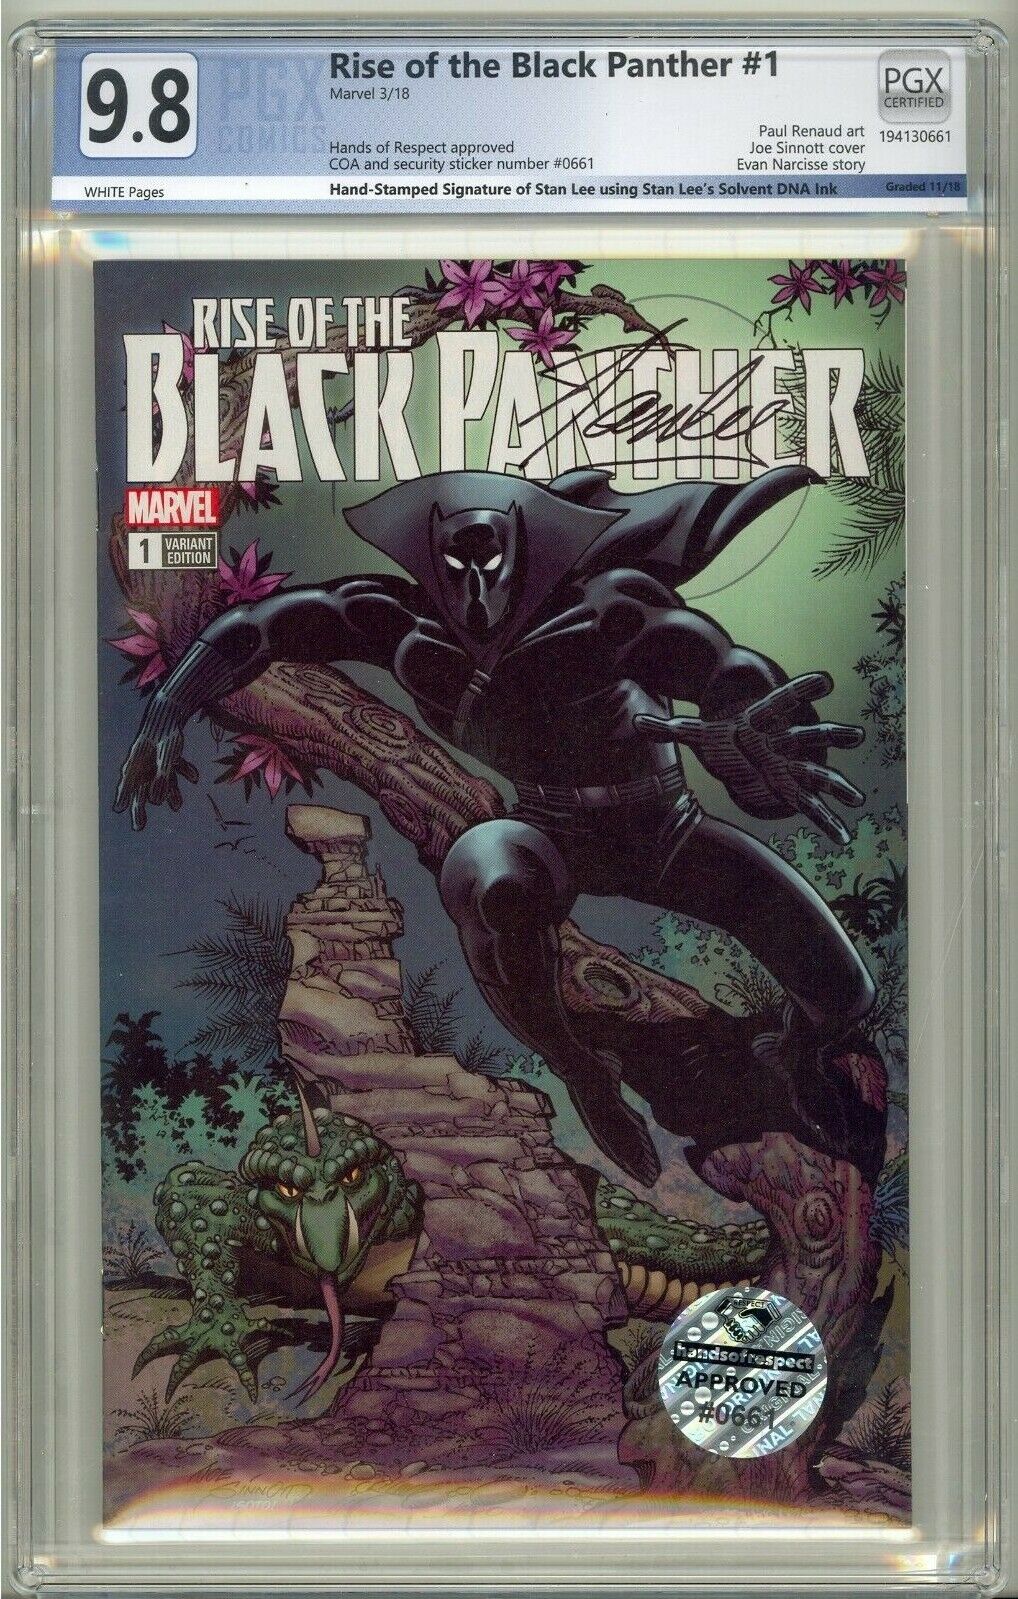 RISE OF THE BLACK PANTHER #1 DNA INK OF STAN LEE STAMPED SIGNATURE PGX 9.8 W/COA